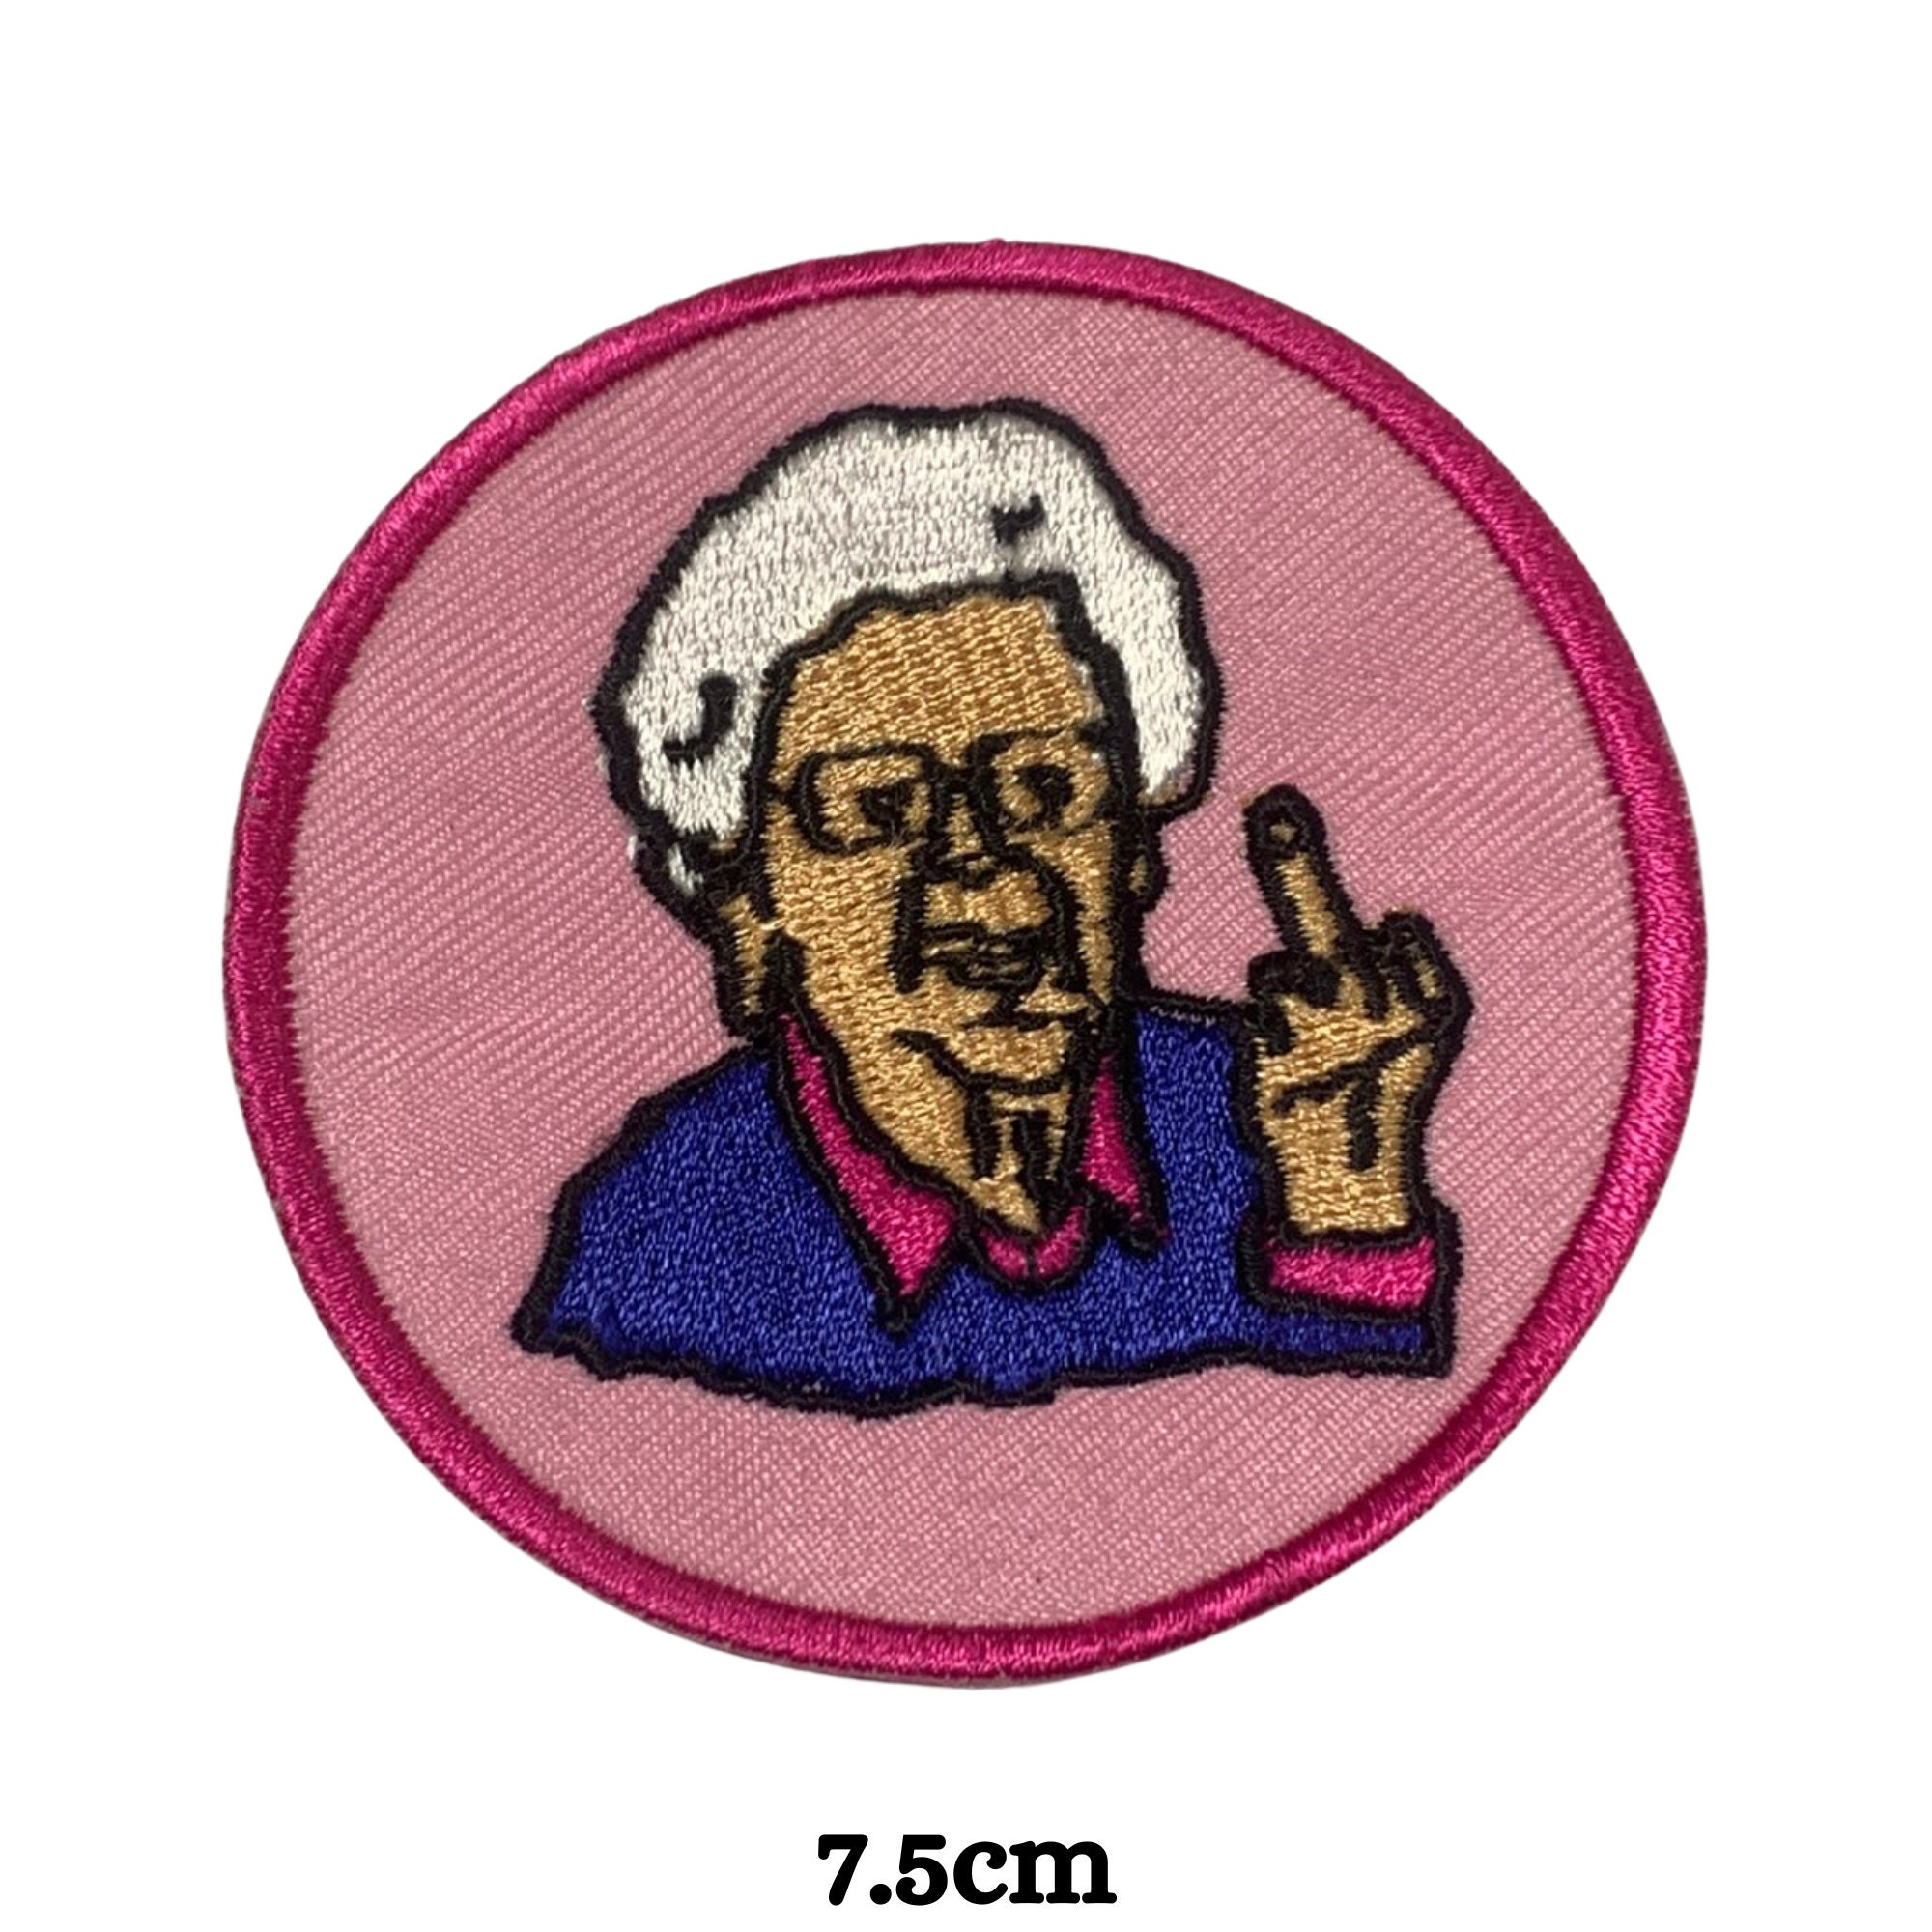 Grandma Saying FCK You Funny Slogan Word Patches Appliques Fabric